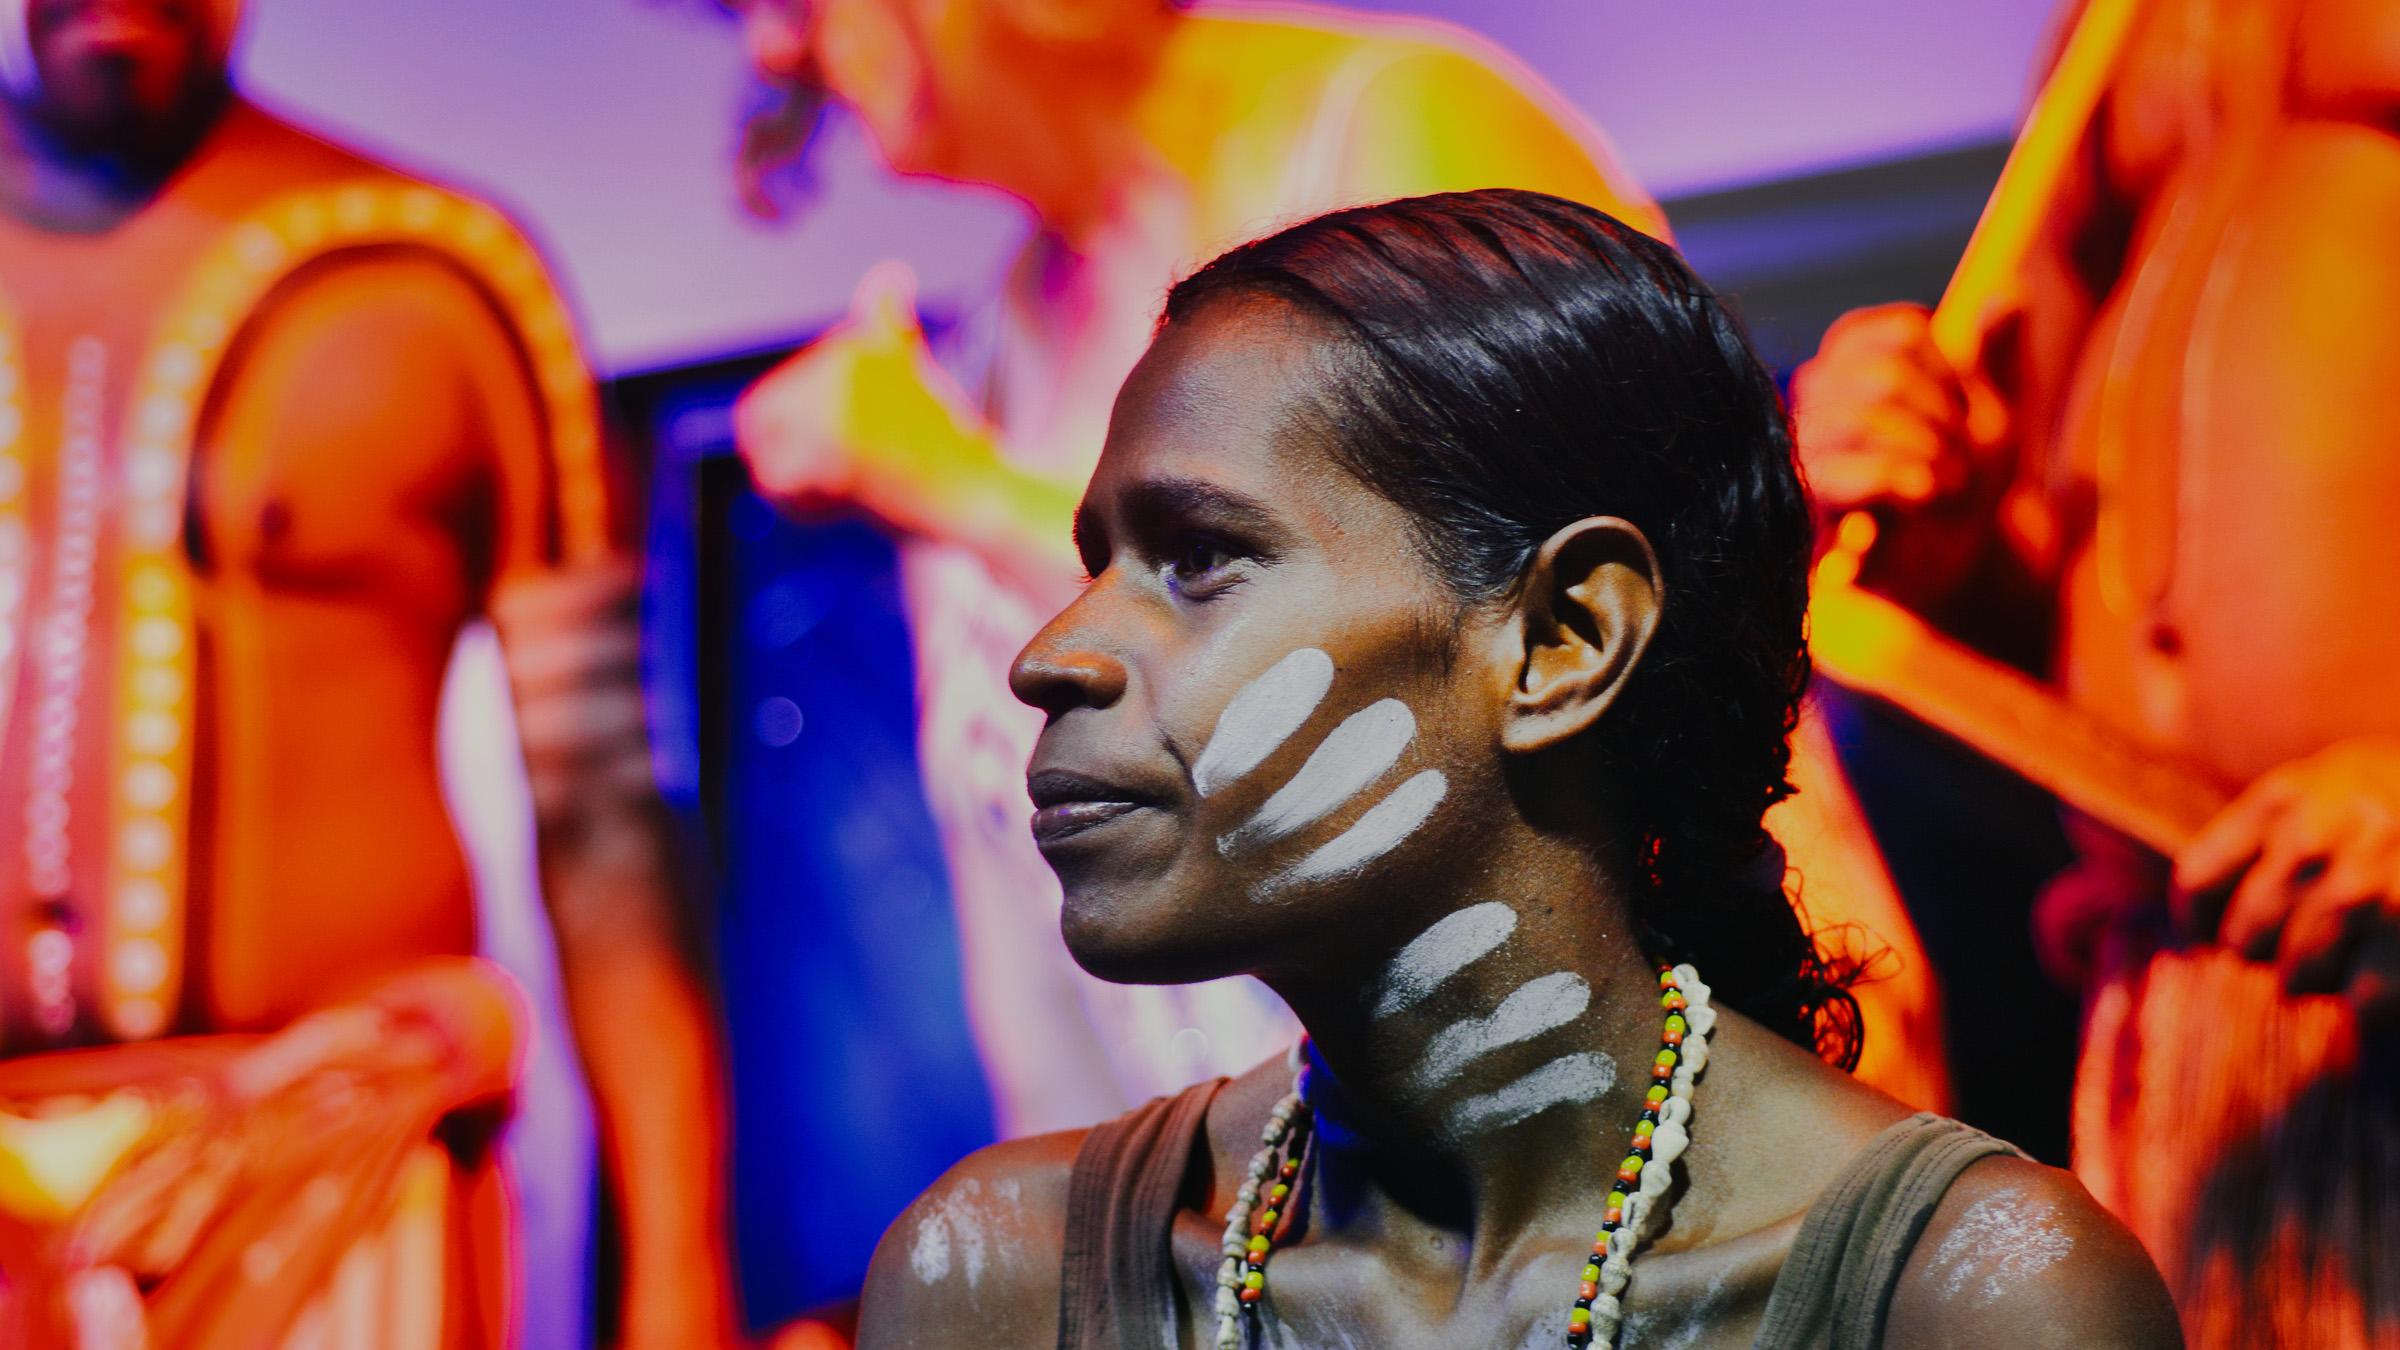 Young First Nations woman with traditional face and body paint performing during a cultural show in Queensland, Australia.